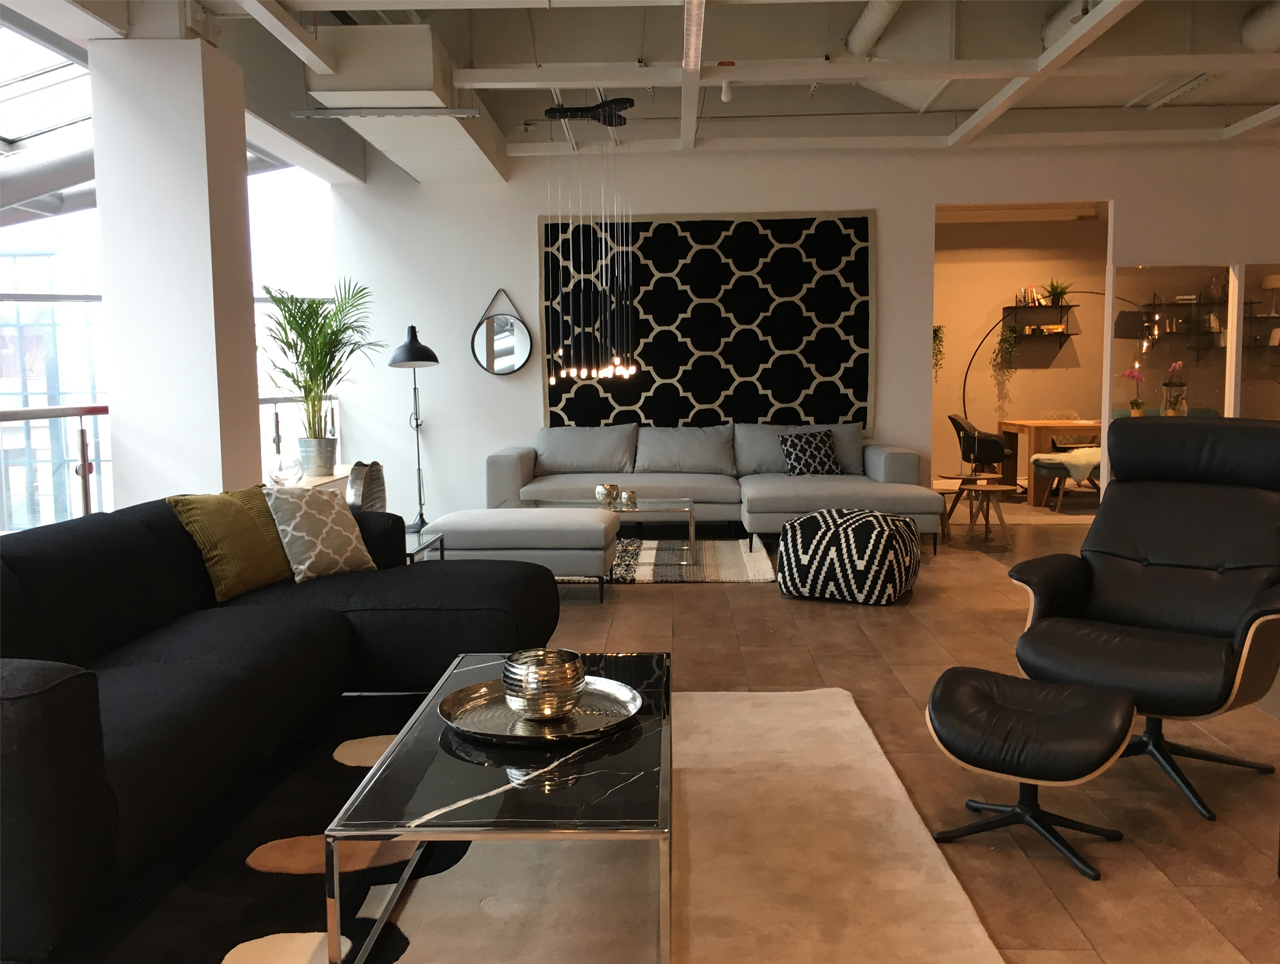 Home24: Neues Outlet inklusive Showroom in Köln | stores+shops